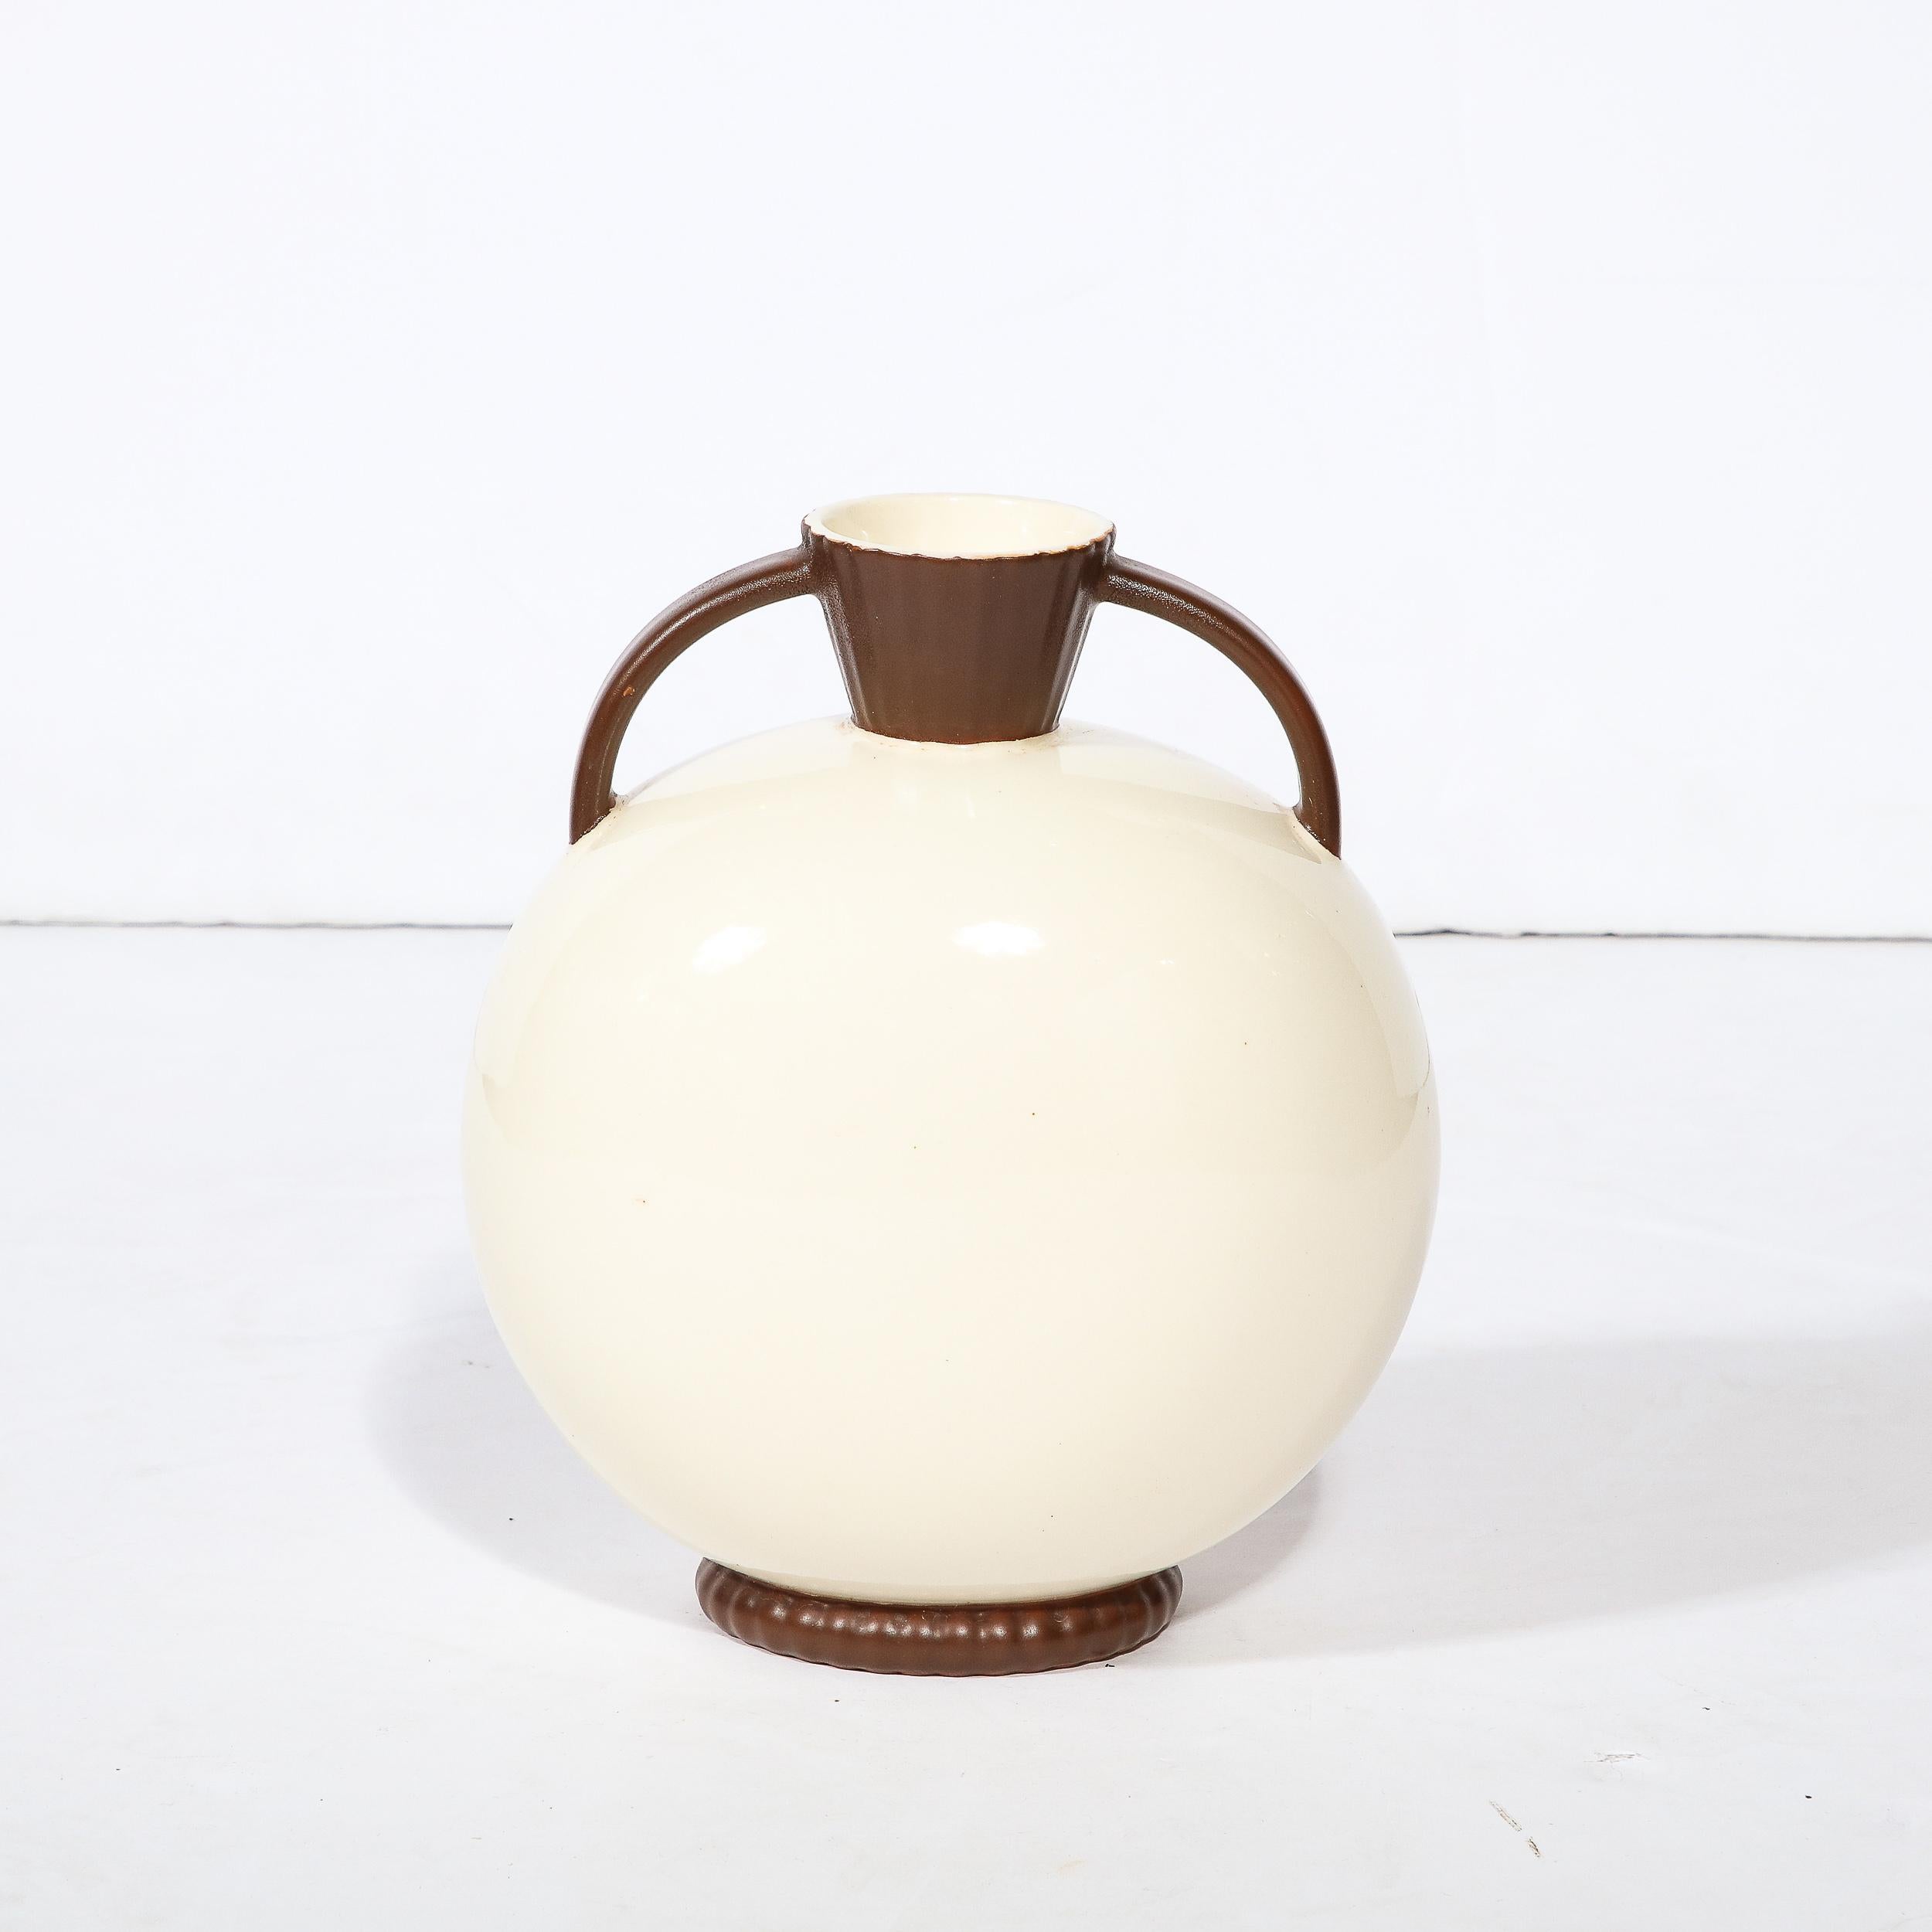 This elegant Art Deco ceramic vase was realized by the esteemed atelier of Royal Crown in Czechoslovakia circa 1930. Suggesting a modern interpretation of the classic Greek amphora vase, the piece offers a rotund spherical body sitting on an banded